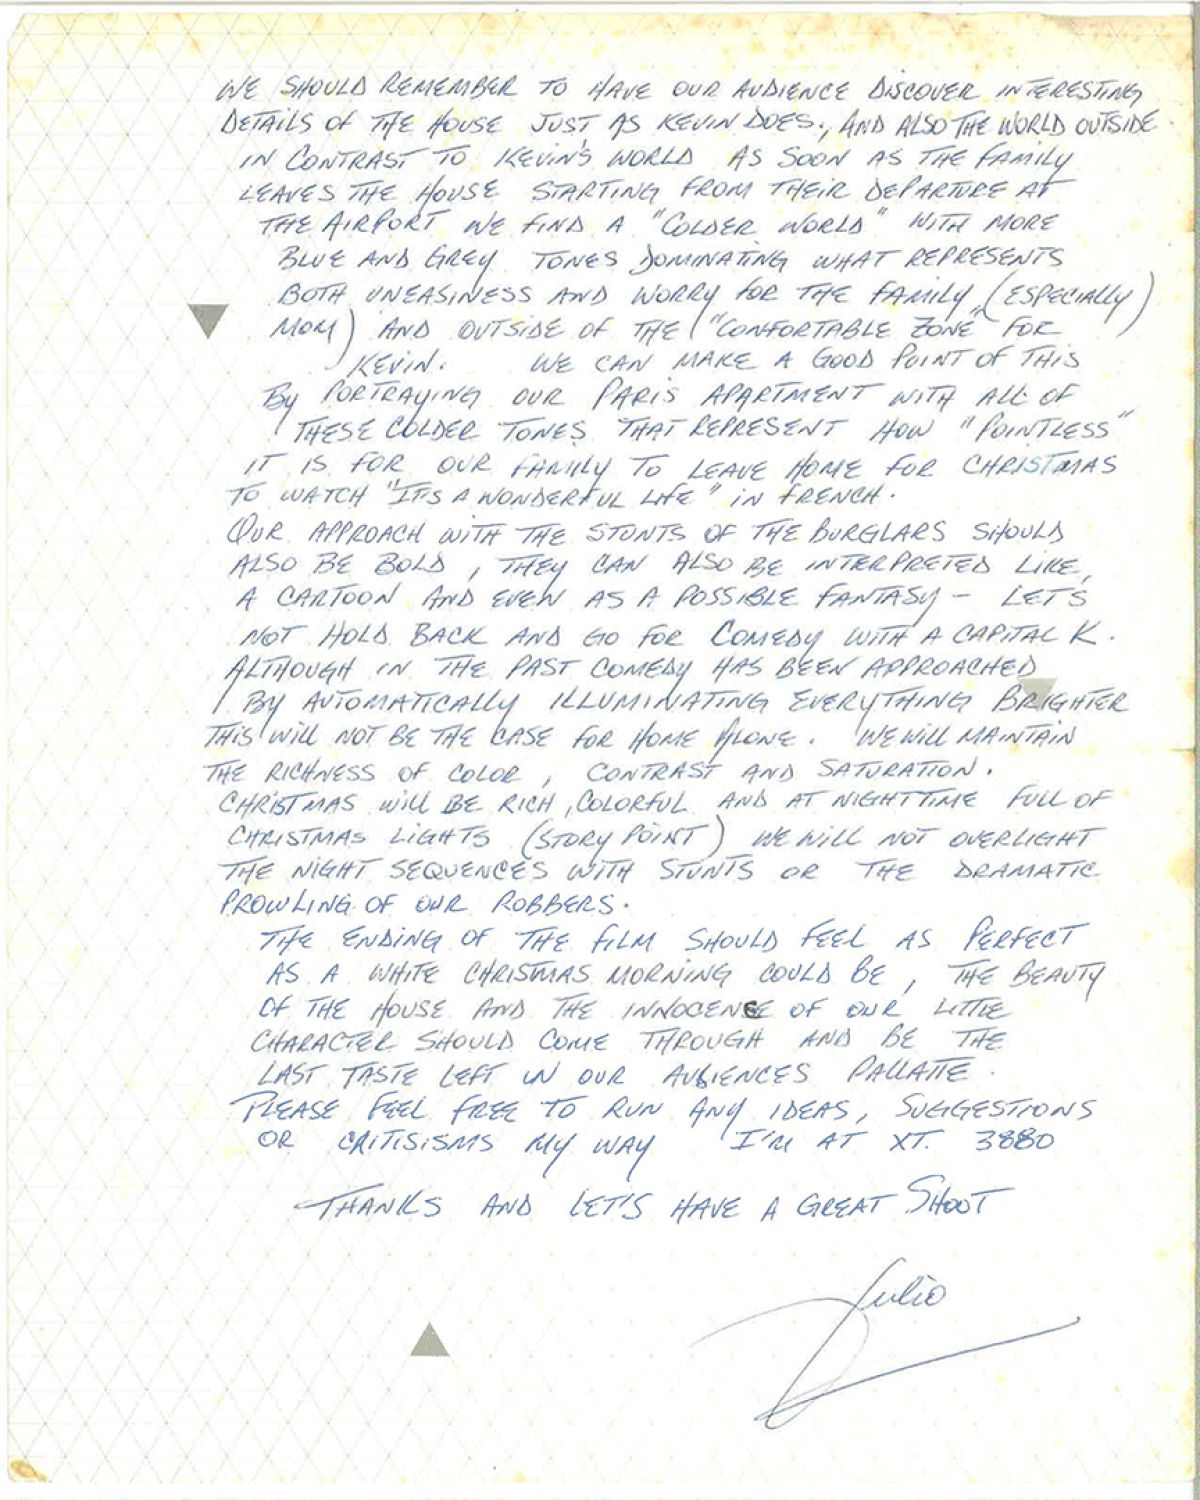 The letter that Macat sent to his crew.